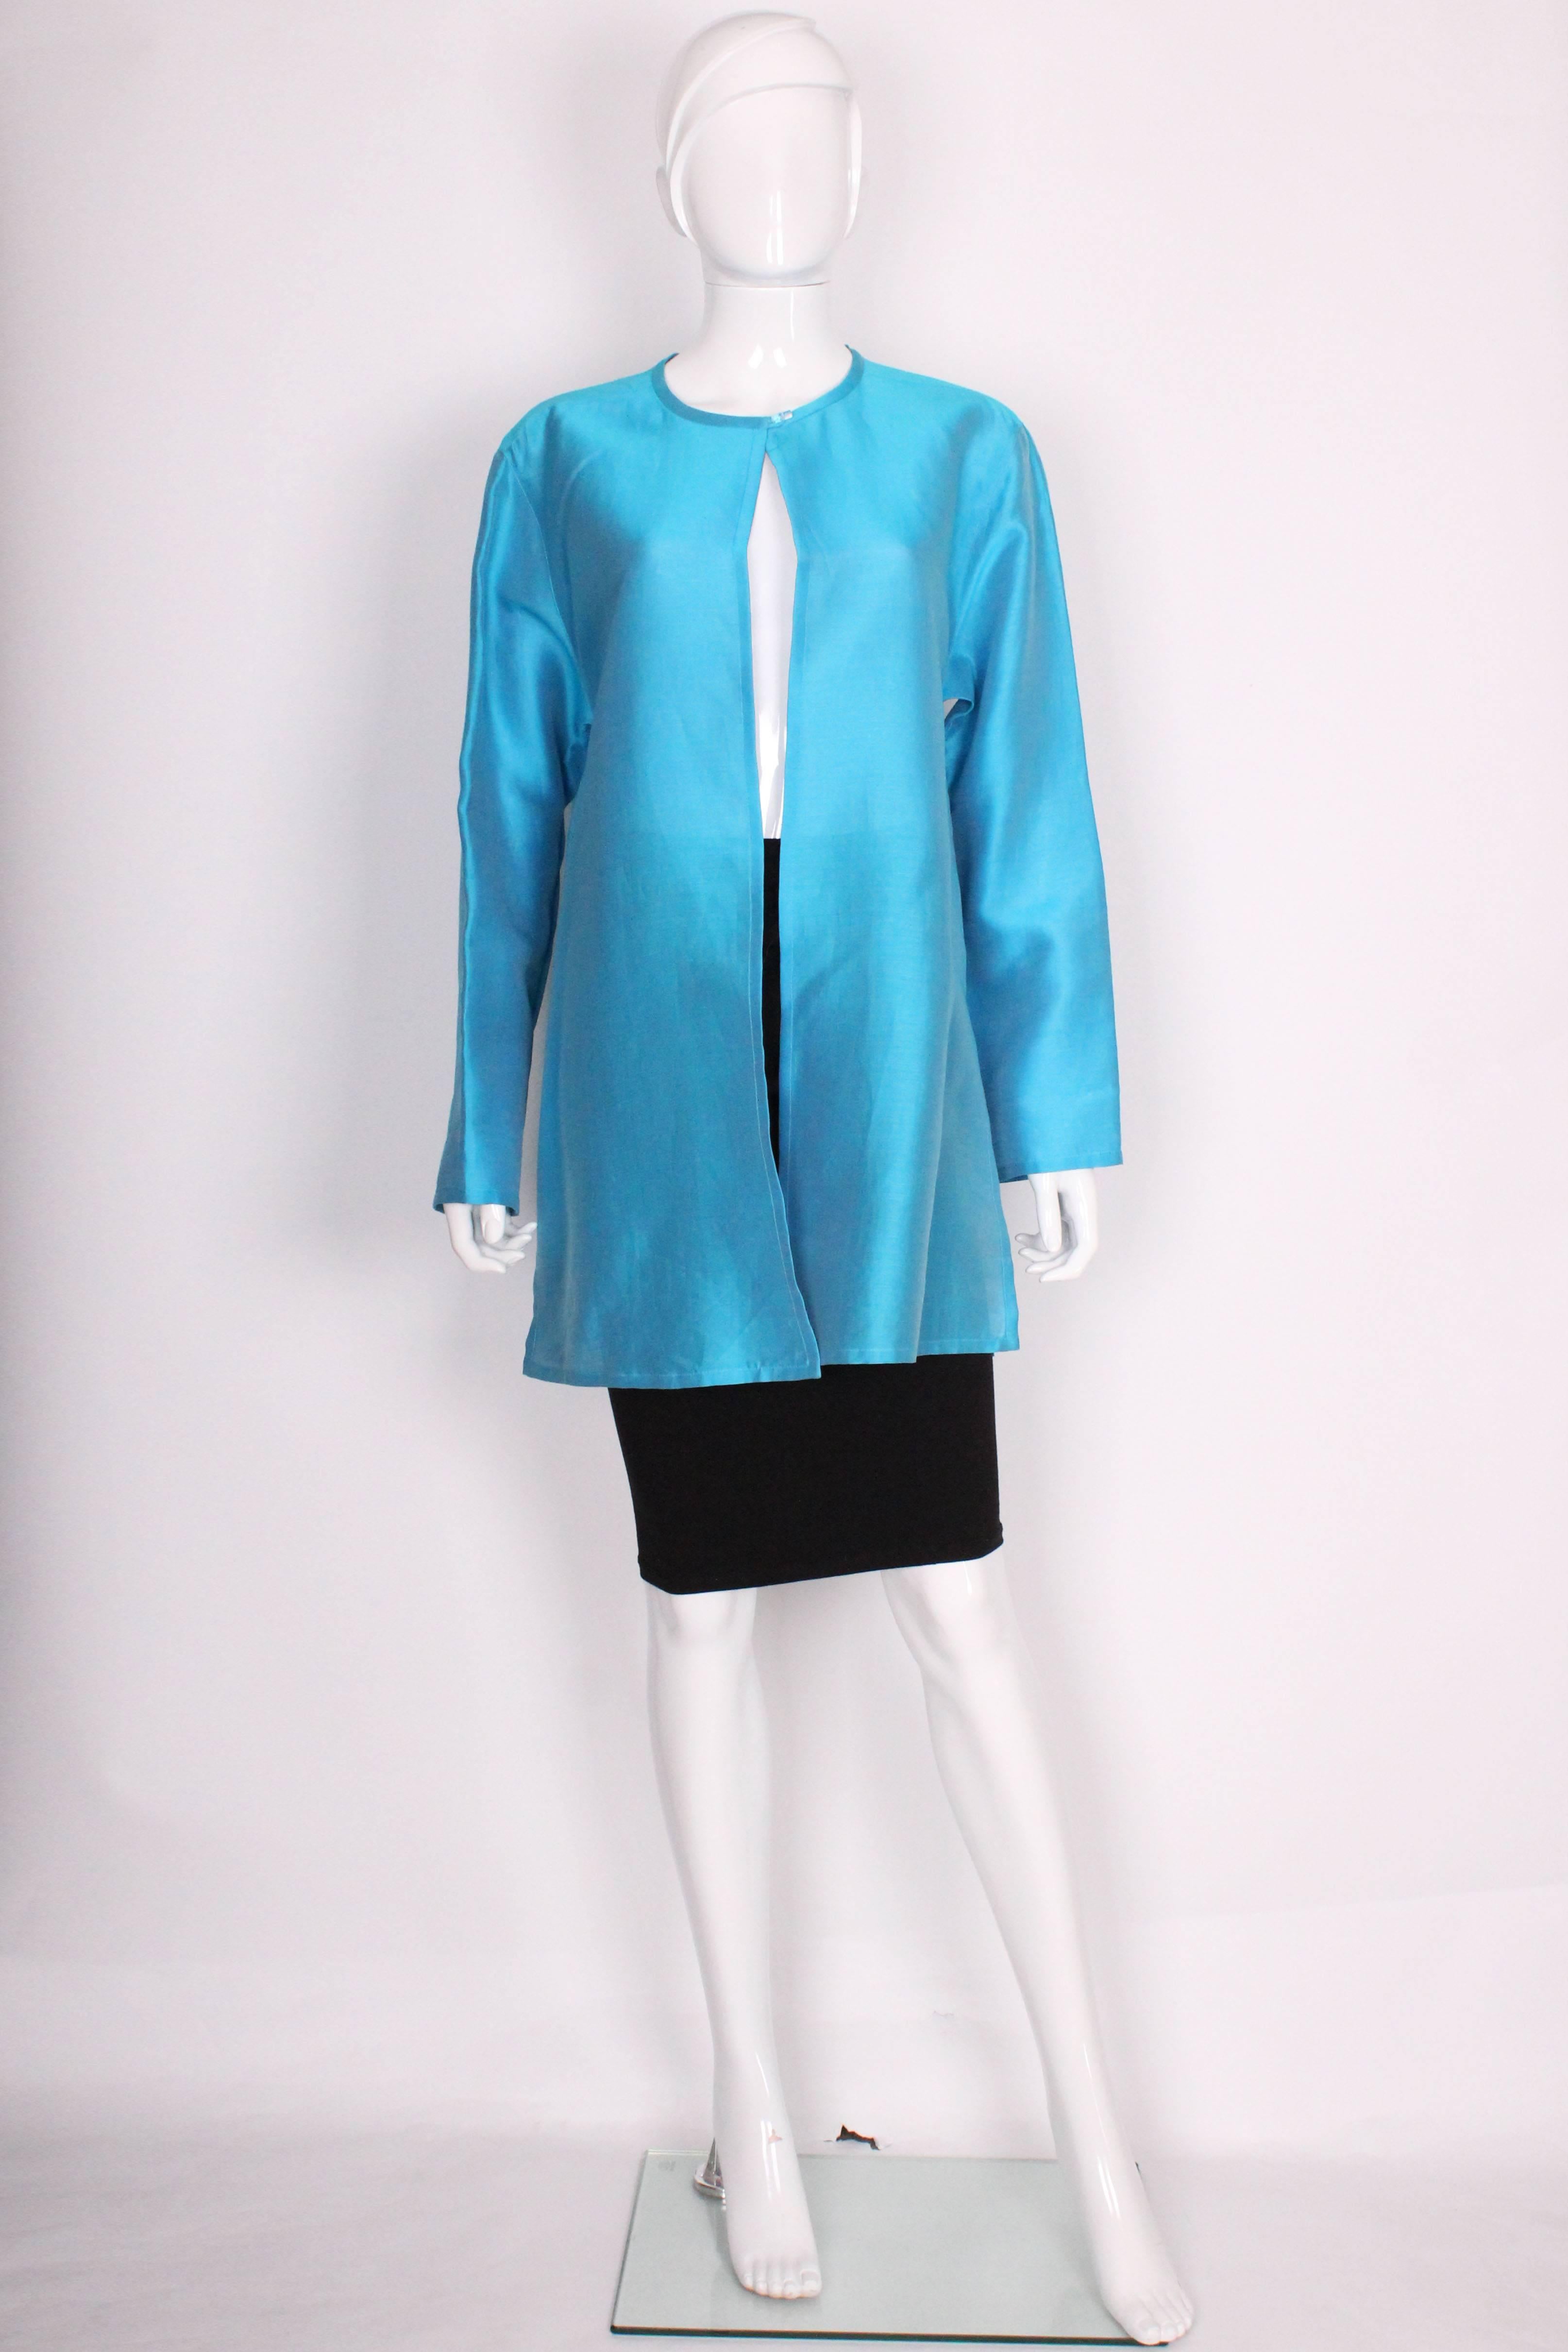 A stunning jacket by British designer Jean Muir .In an stunning turquoise colour with dark blue lining, this jacket will brighten up any outfit. The jacket has a round collar, with a one button fastening at the neck. There is a 11 1/2'' slit on